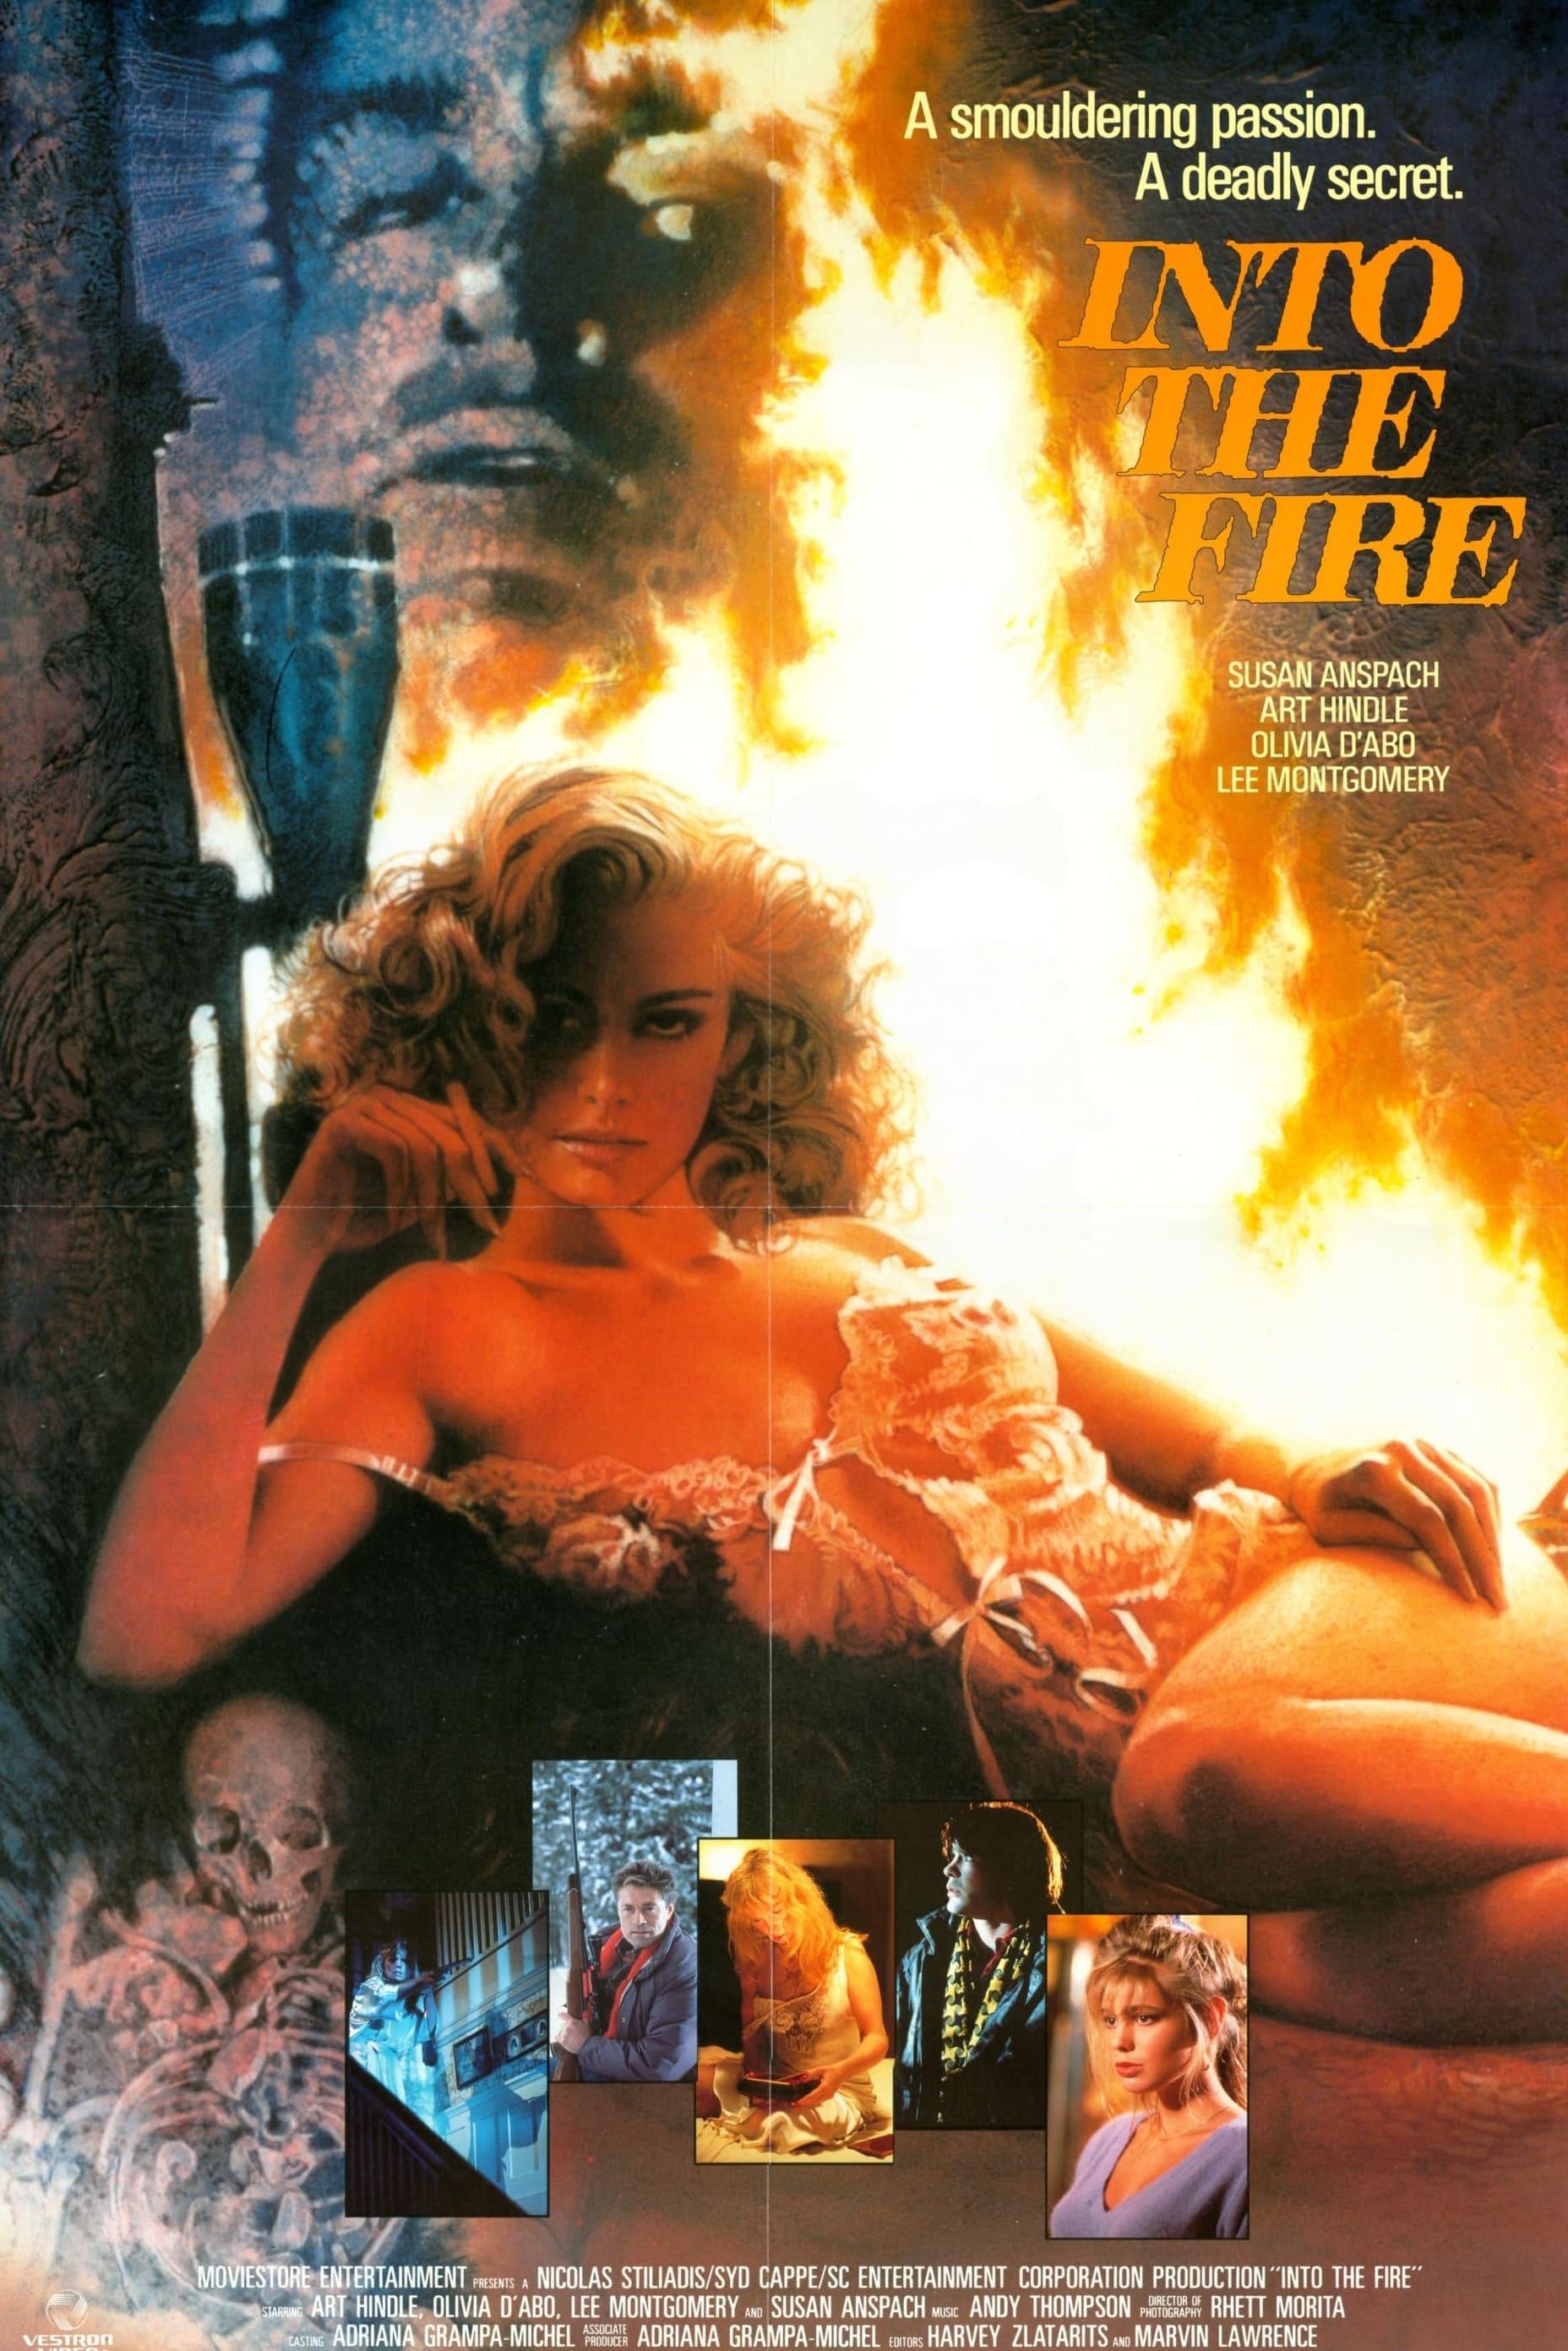 Into the Fire poster